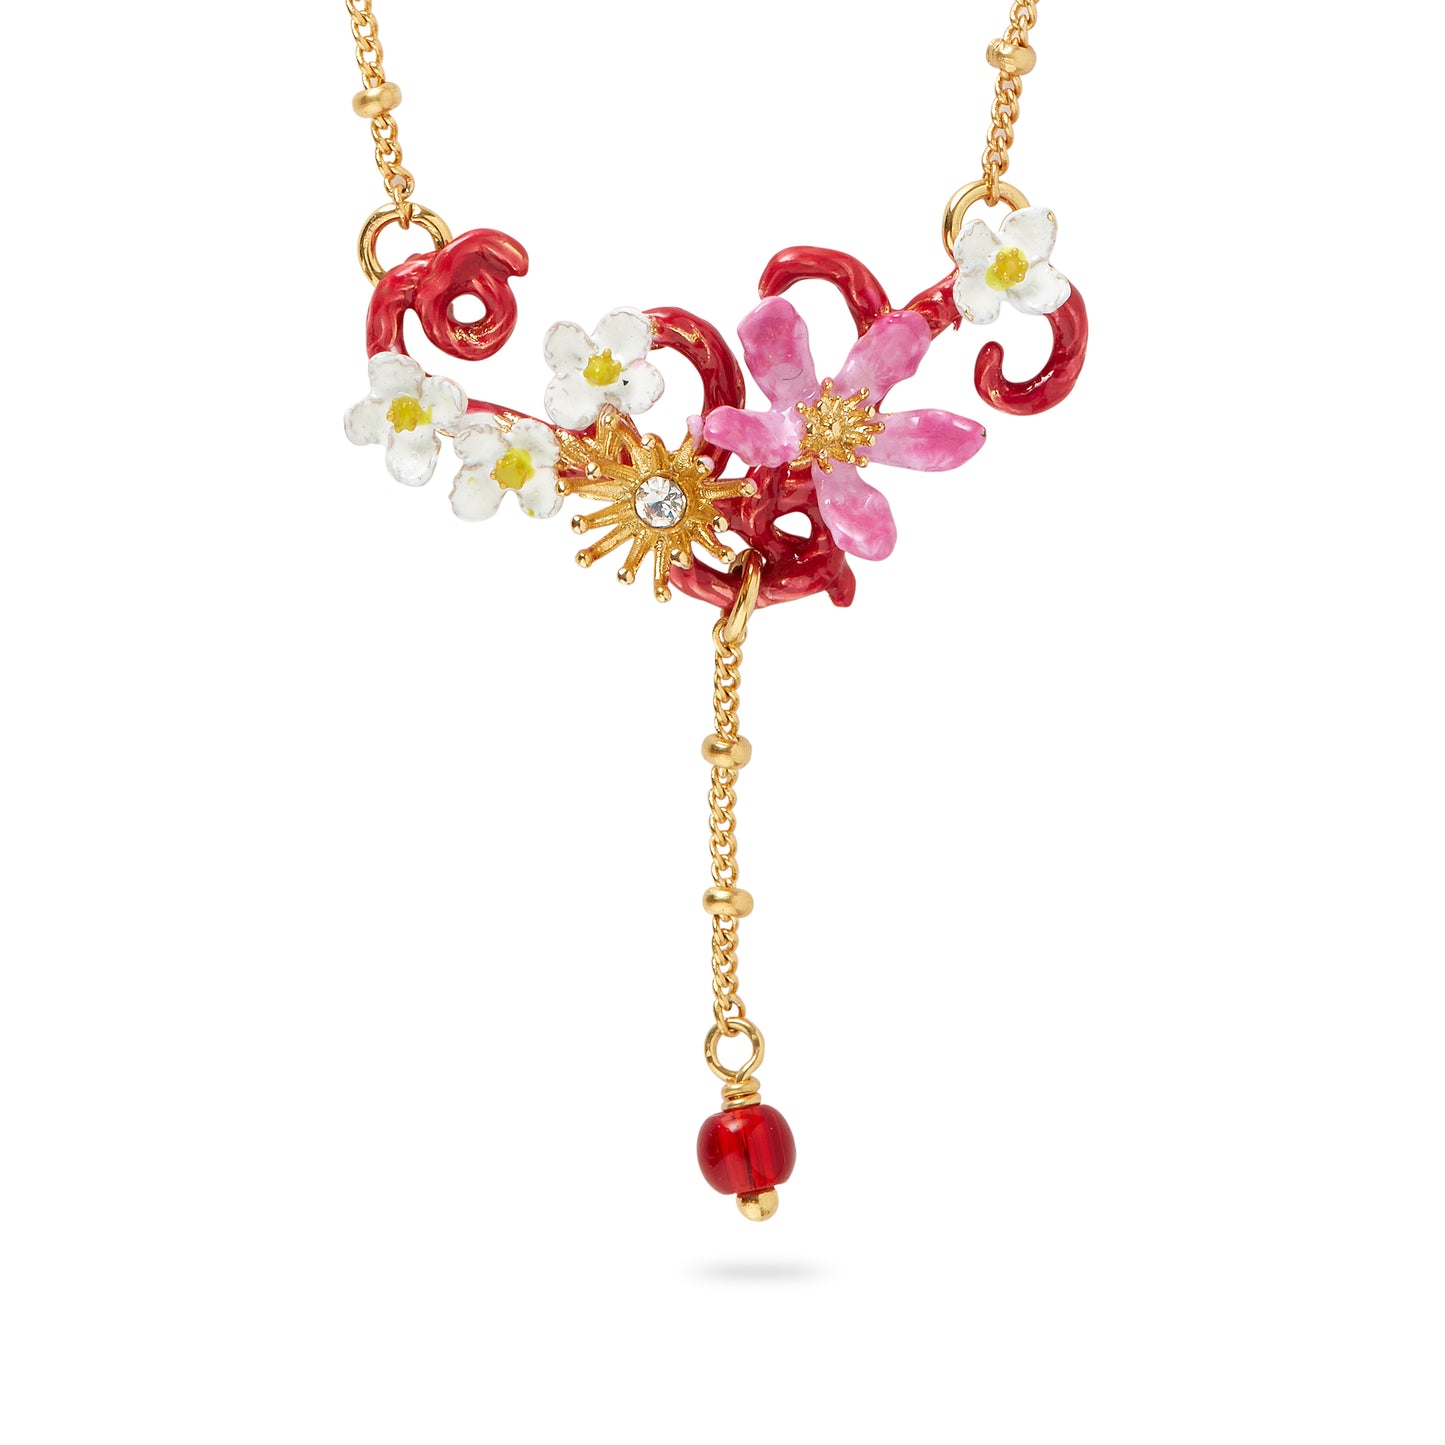 Vine Flowers And Pearl Pendant Statement Necklace | AQVT3021